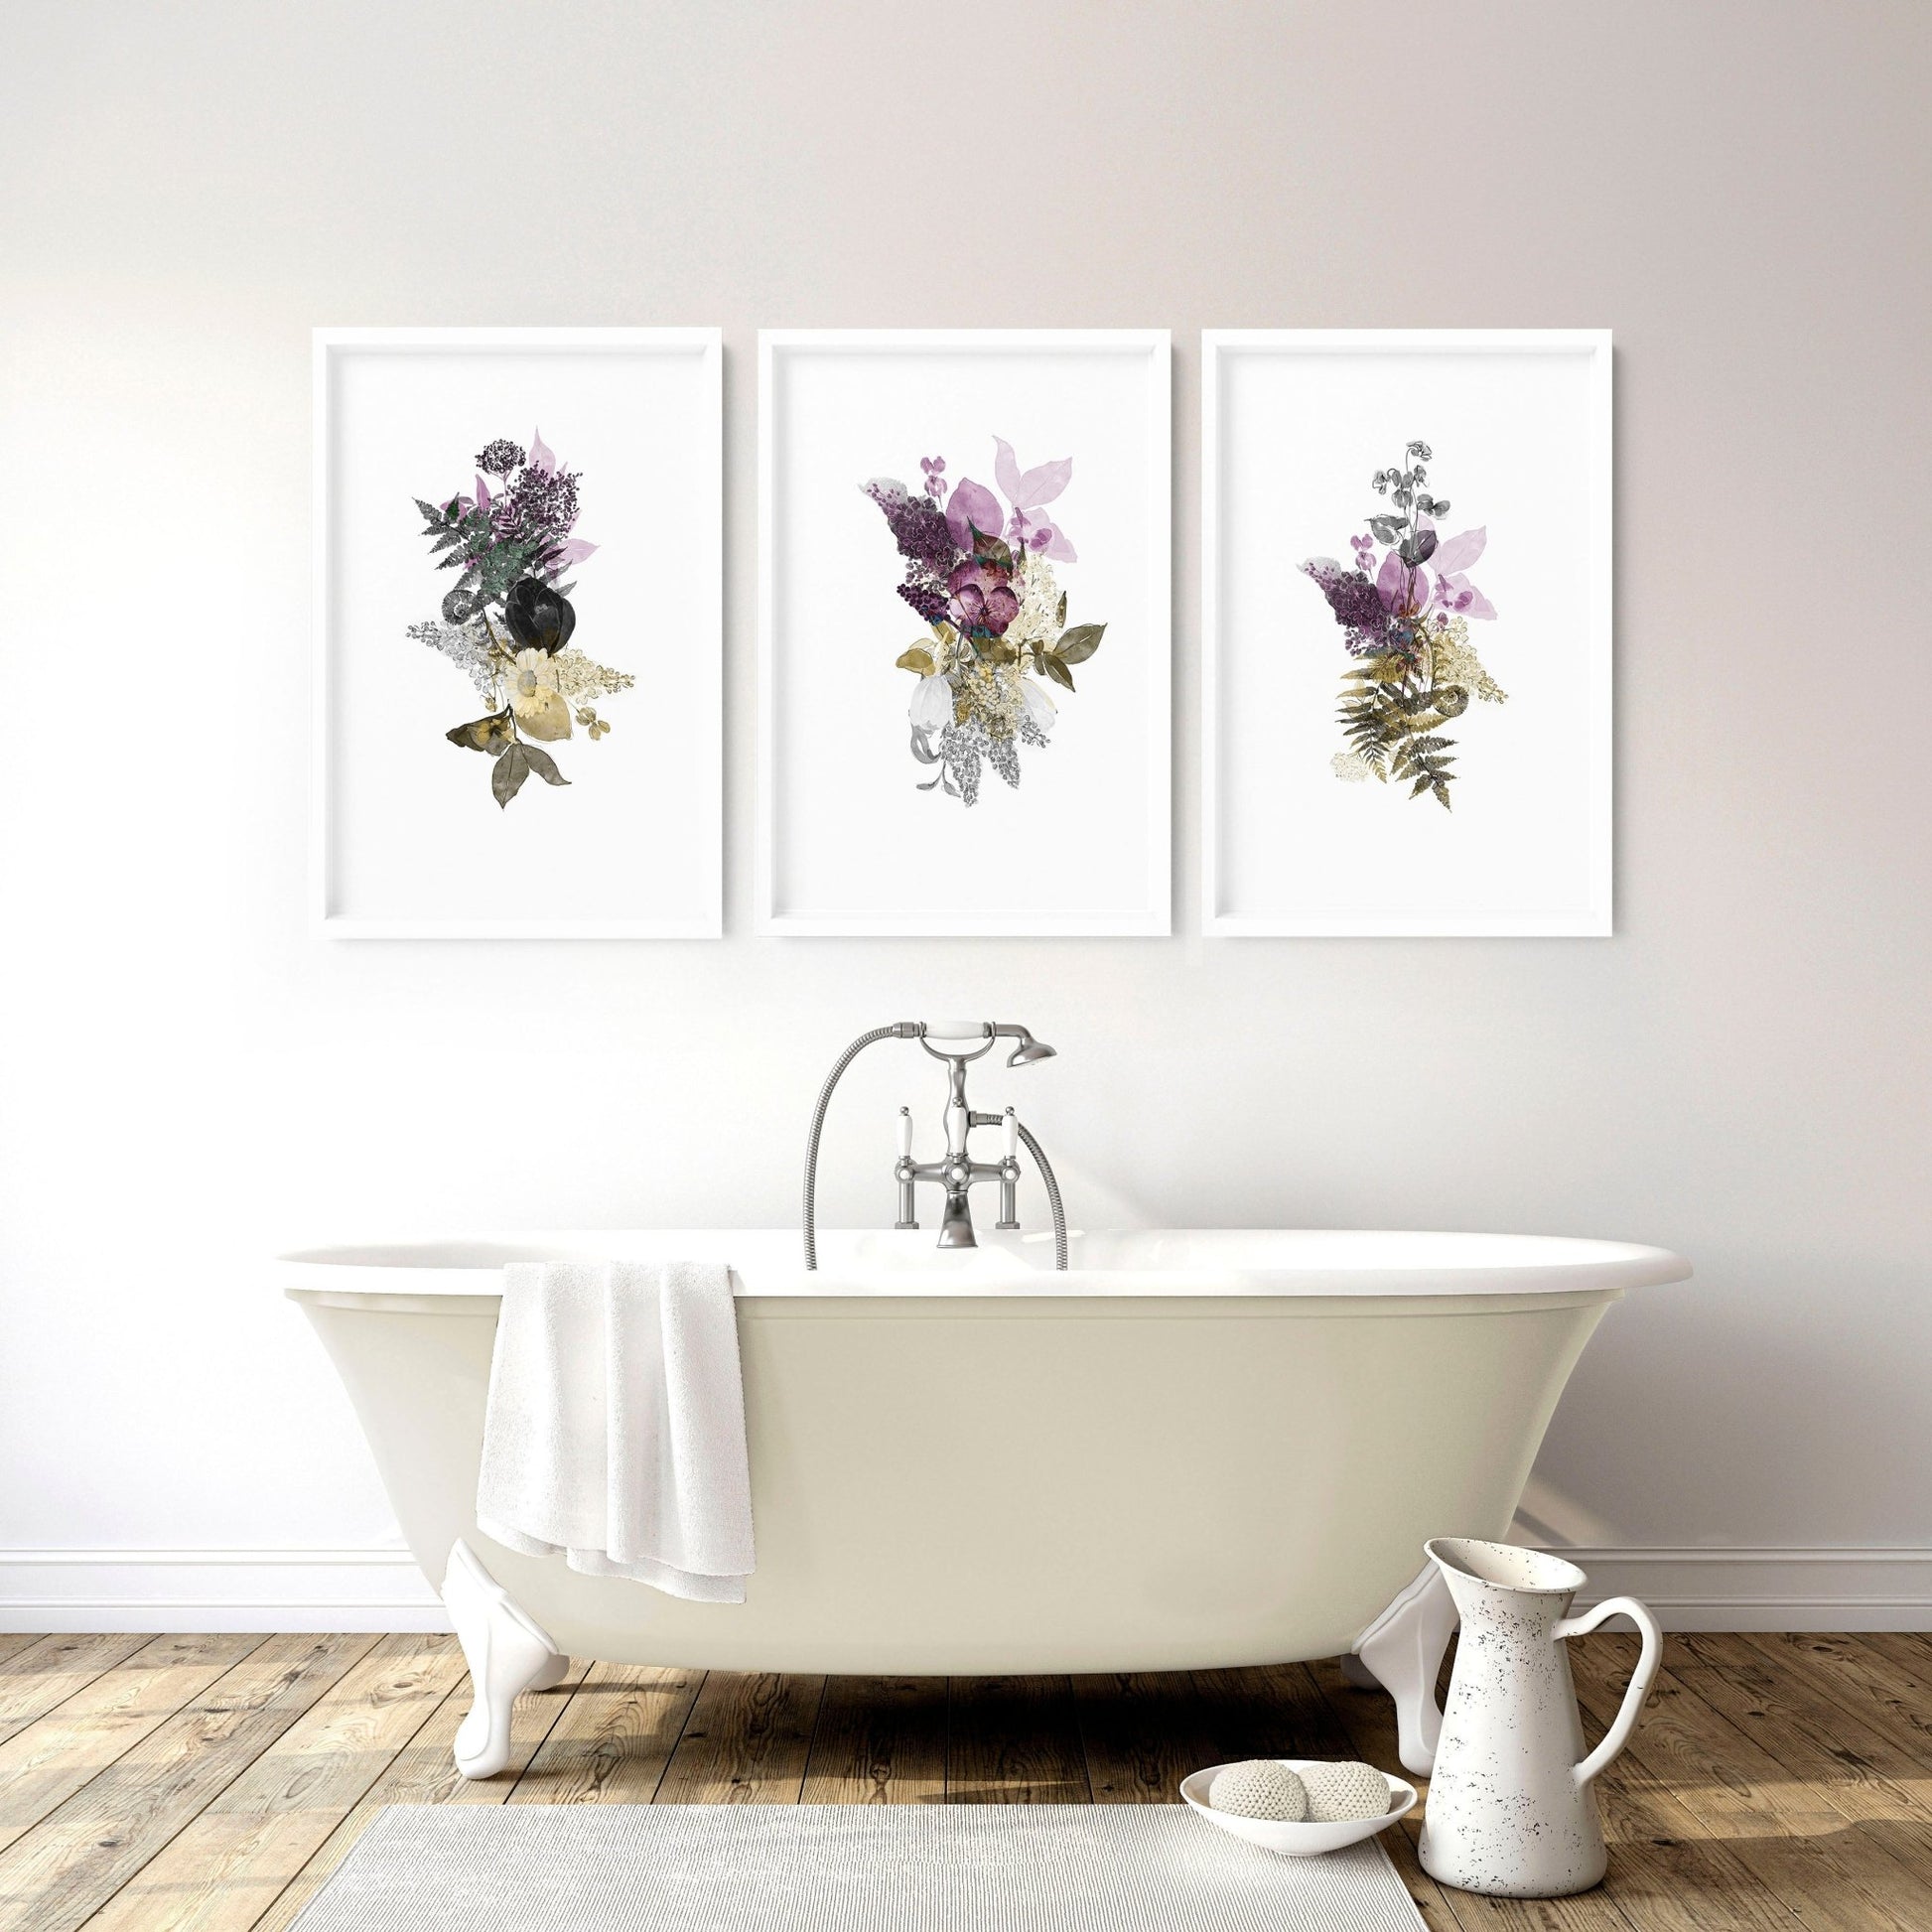 Farmhouse wall pictures for bathrooms | set of 3 wall prints